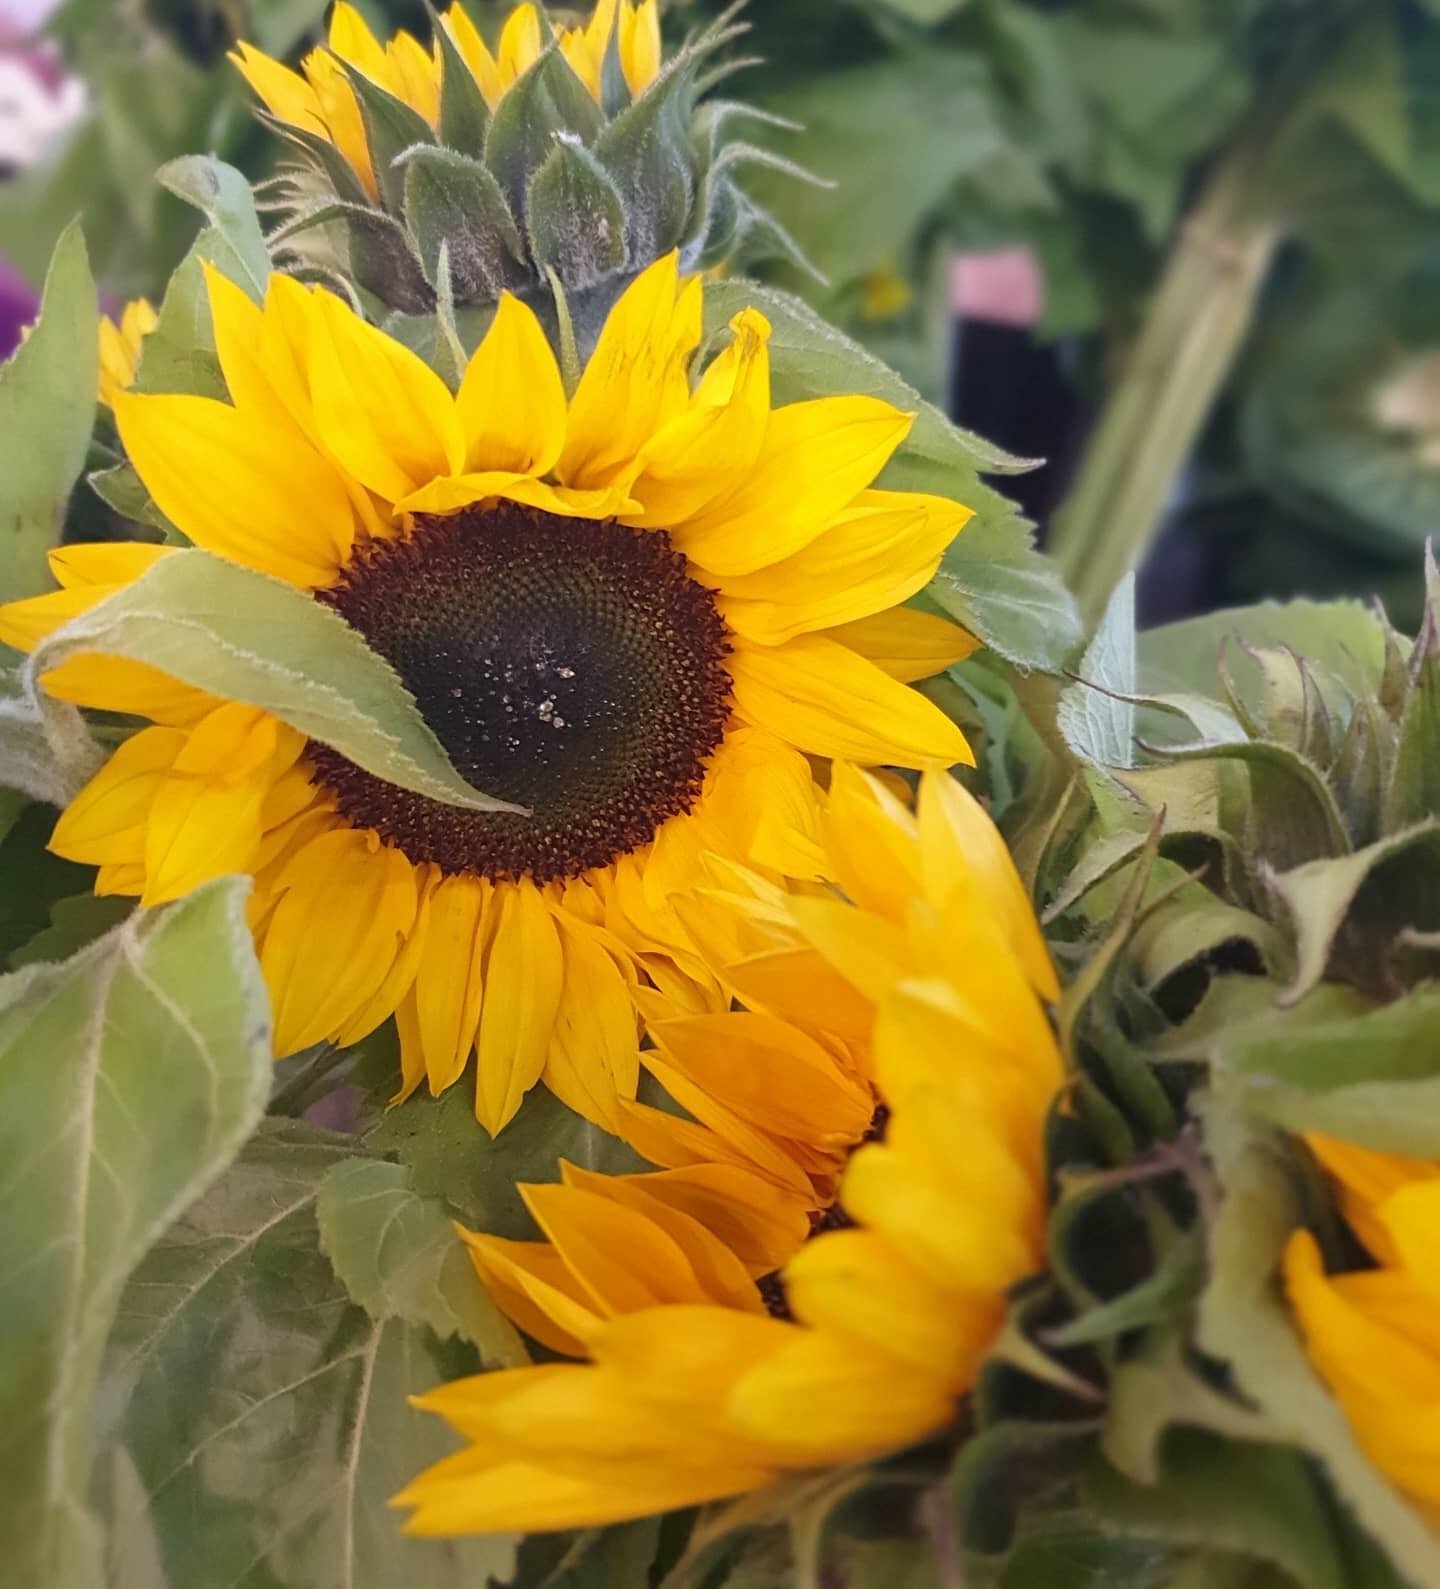 So excited that the sun is coming out for a bit in Melbourne! Happy Thursday everyone as we skip towards the weekend with this beautiful Sunflower reminding us to slow down and enjoy life! Wohooooo!
.
.
.
.
.
#thursday #thursdaymotivation #sunflower 